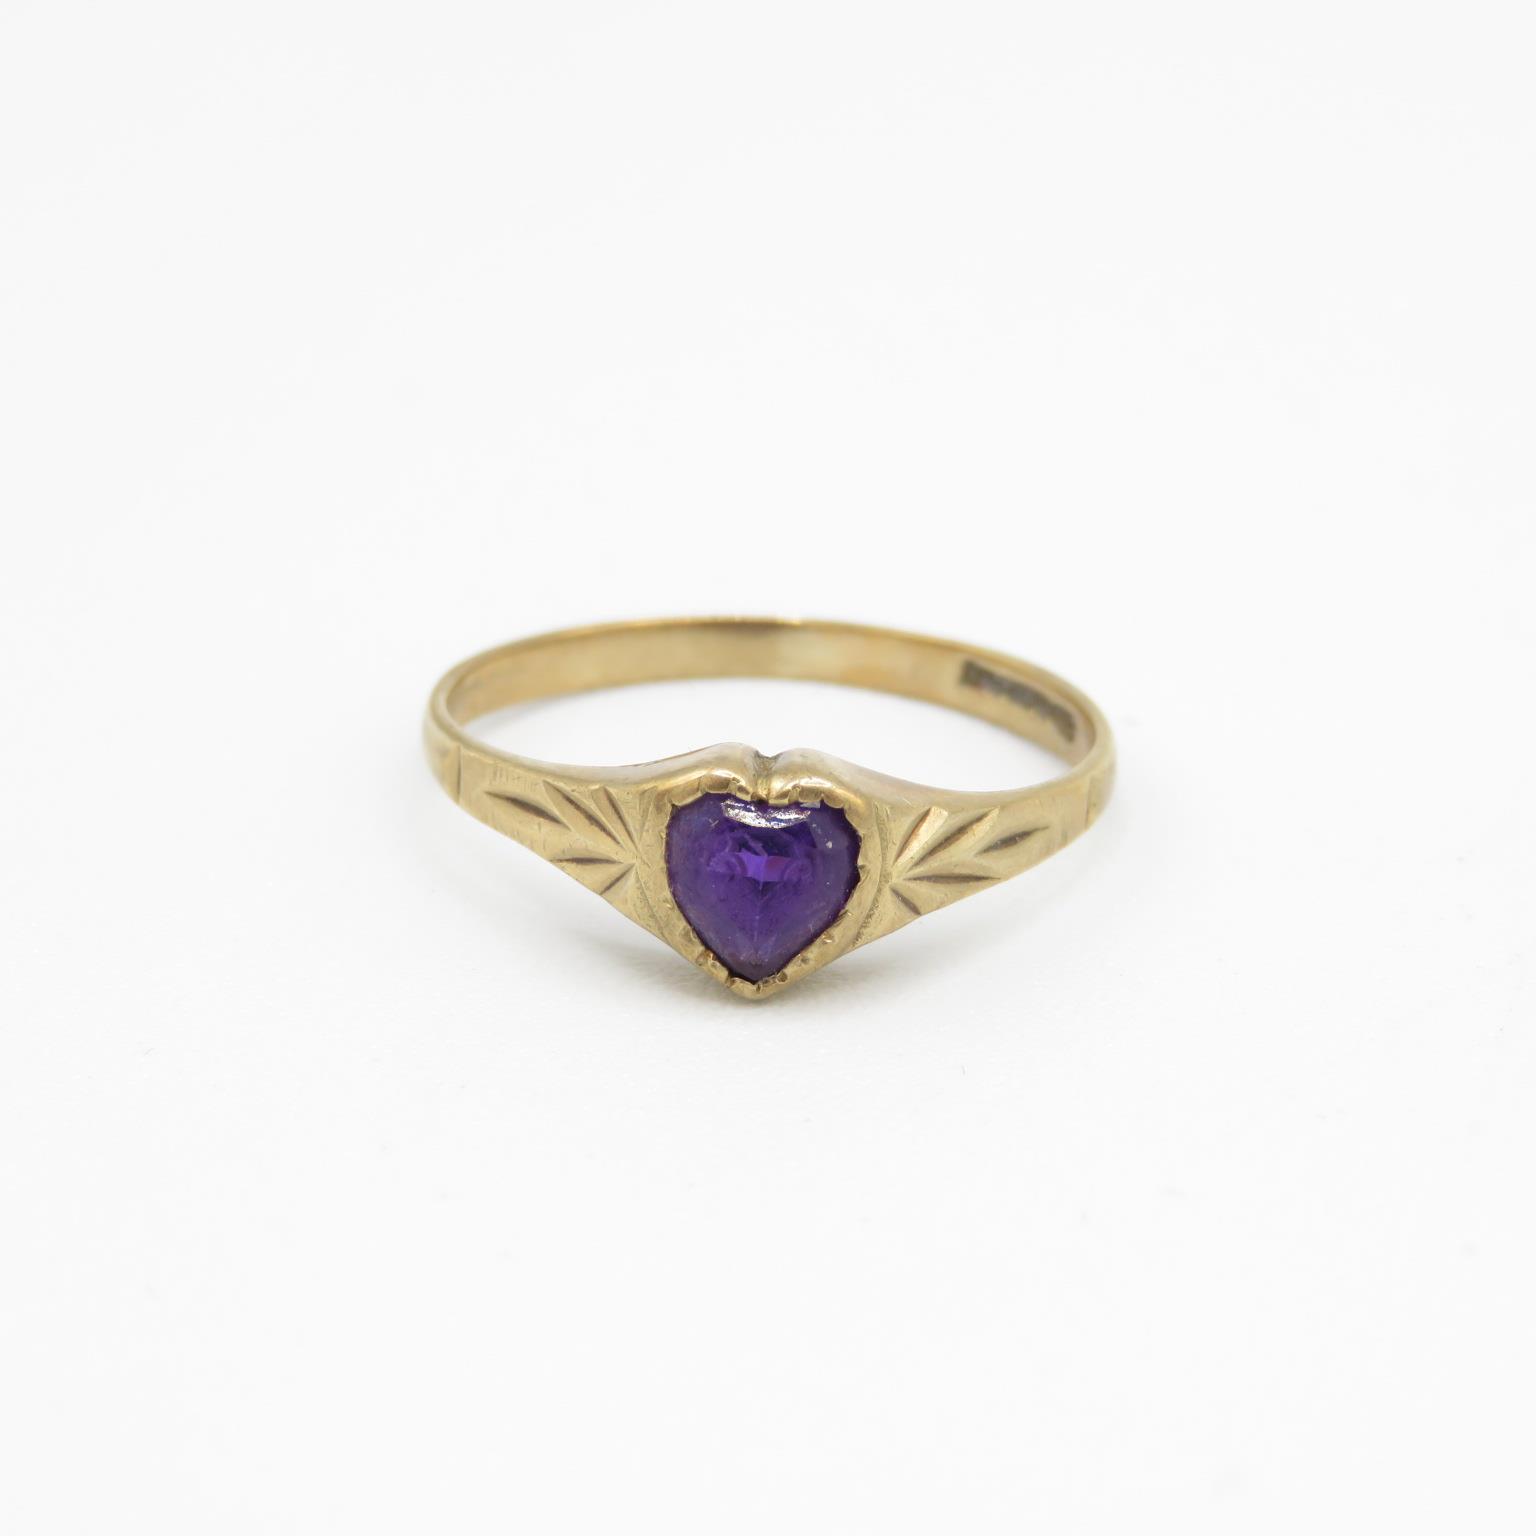 9ct gold heart amethyst single stone ring with engraved shoulders - MISHAPEN - AS SEEN Size K - 1.